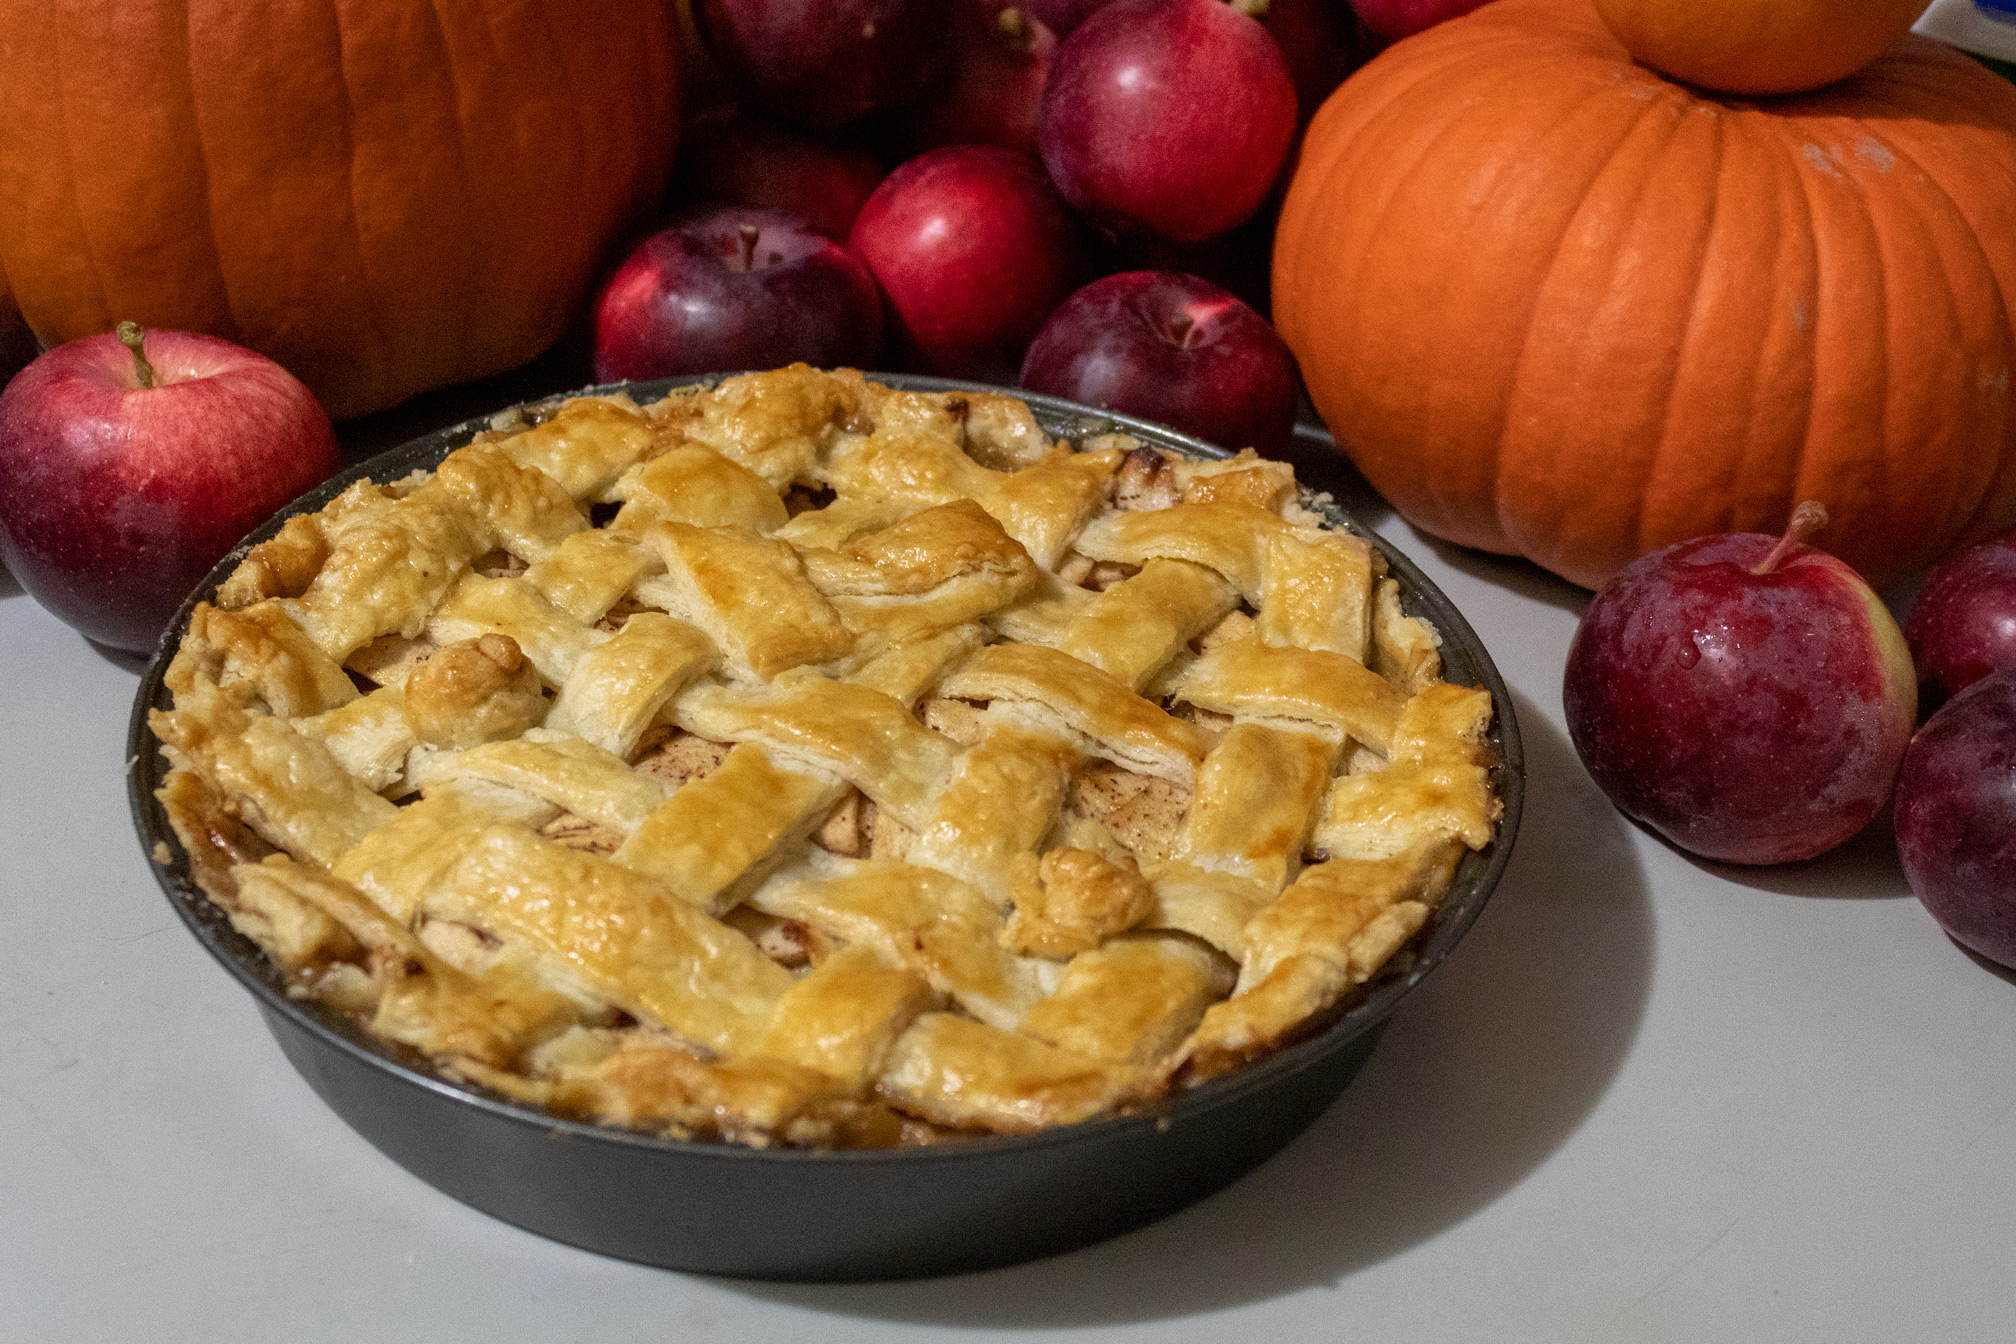 Apple pie with latticed top crust viewed from a skewed angle against a backdrop of Spartan apples and pumpkins